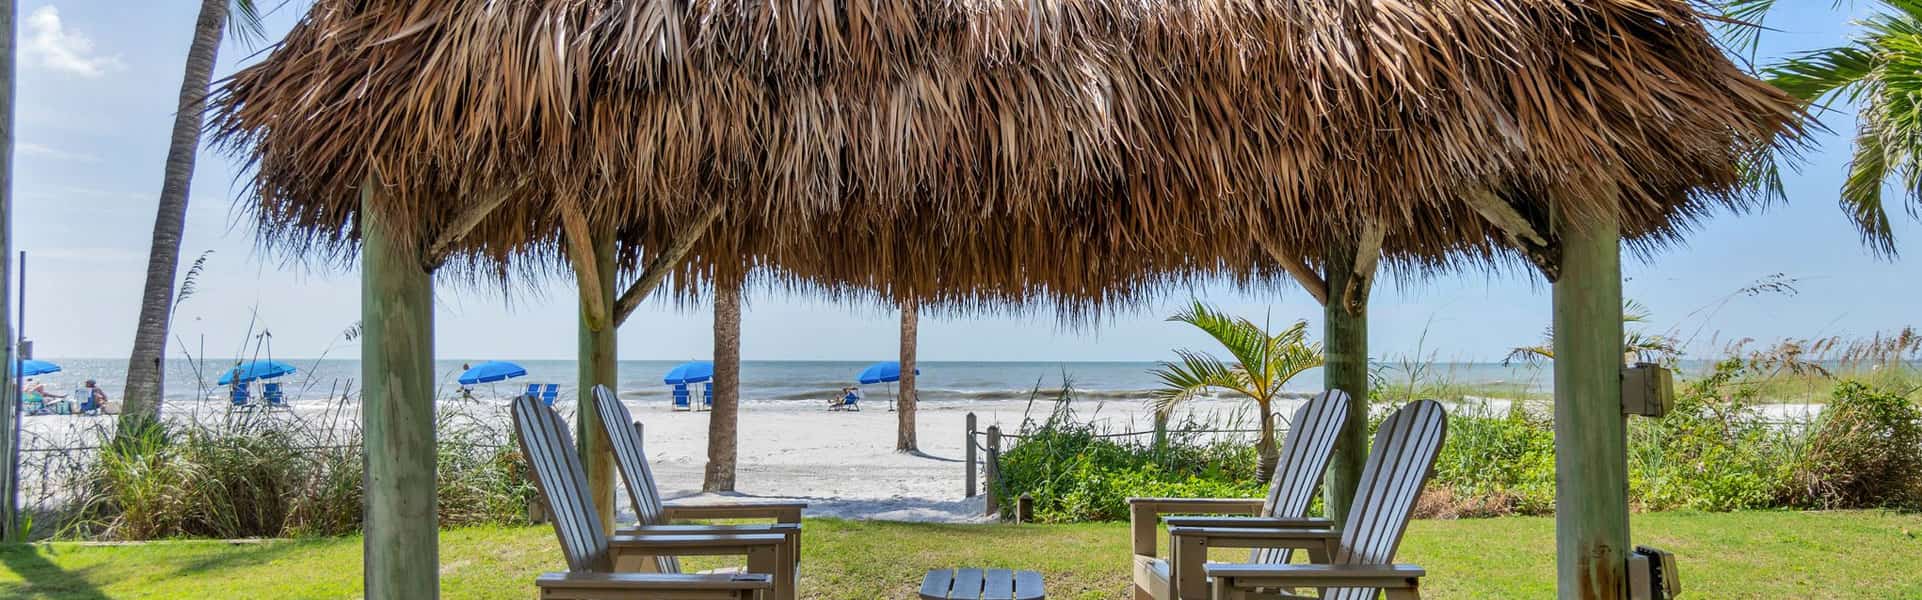 New York Times: 36 Hours in Fort Myers, by Linda Salisbury